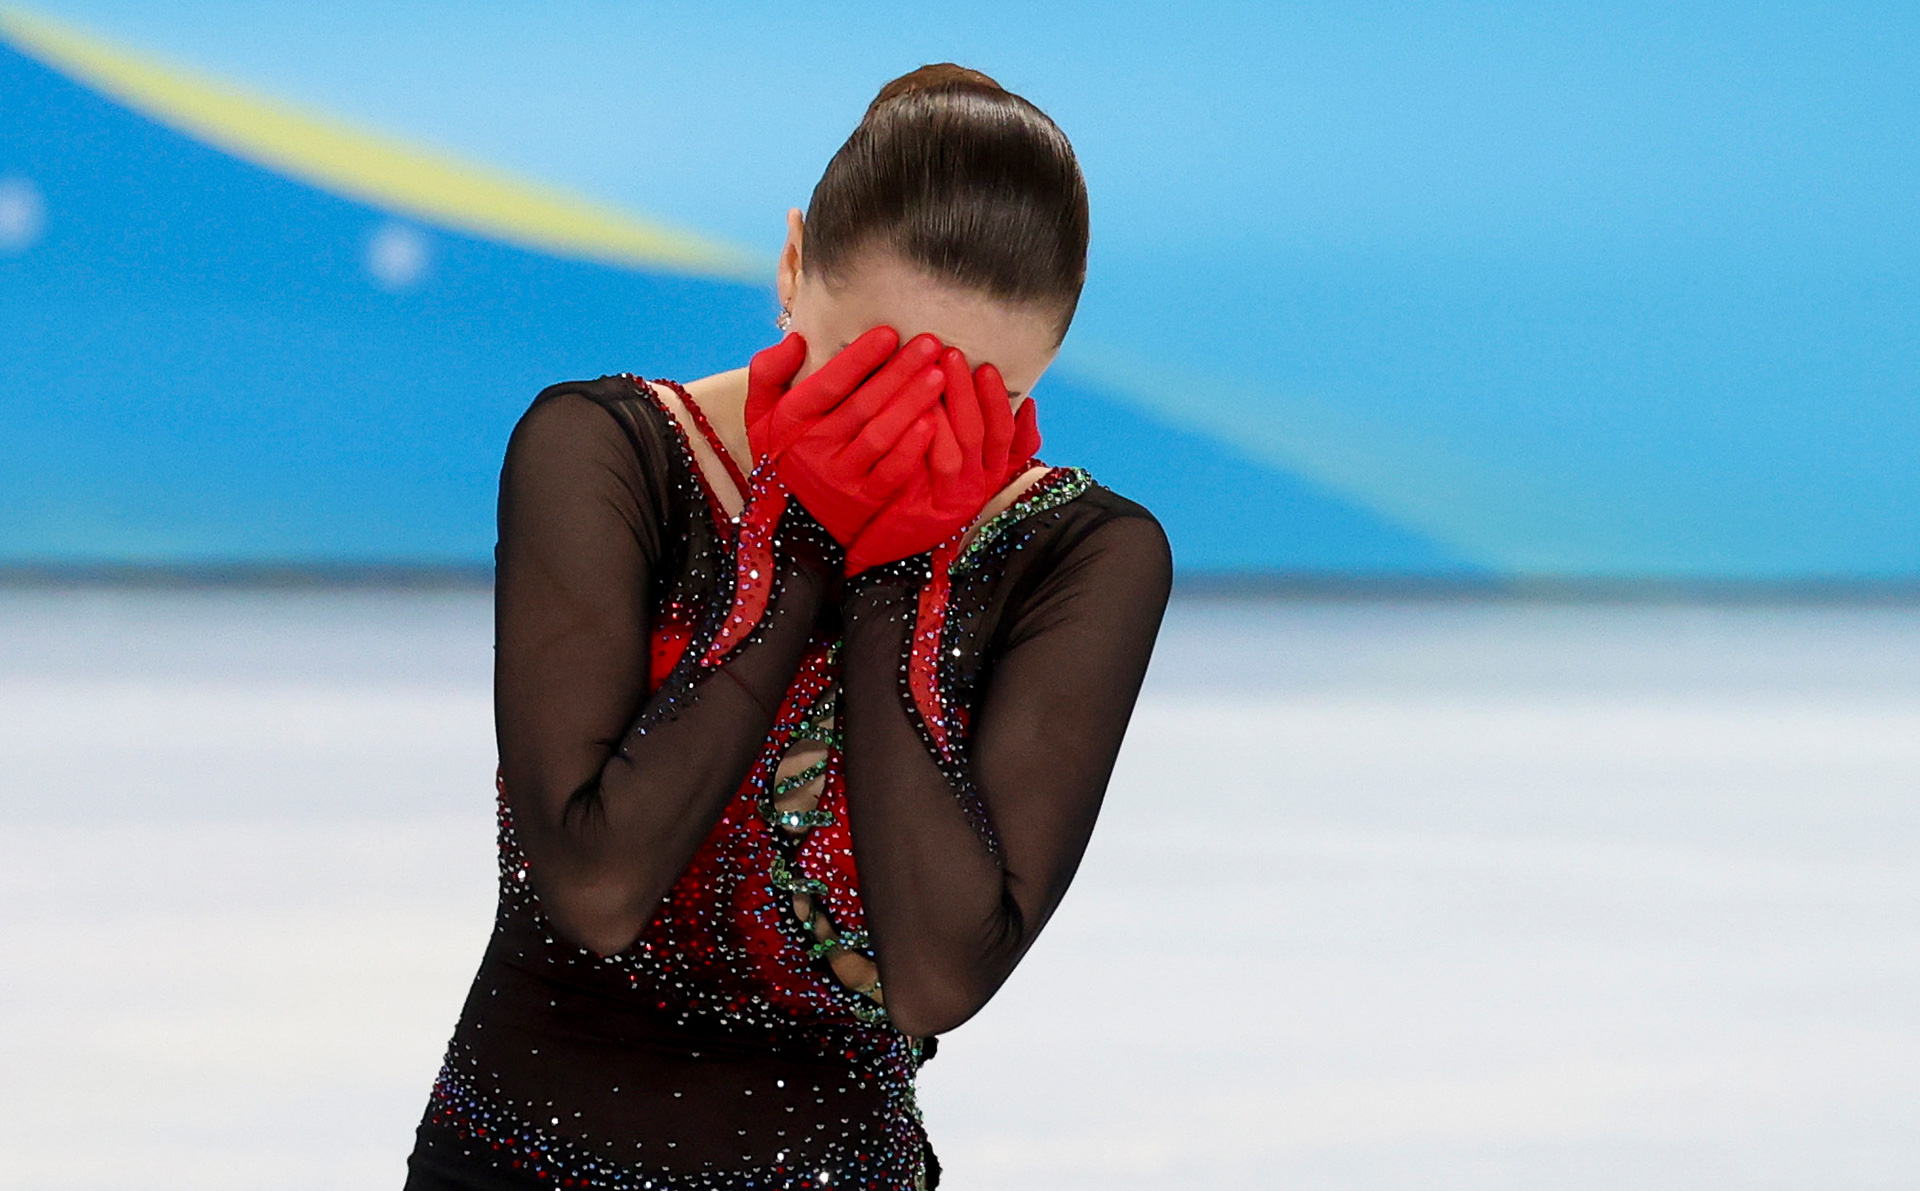 BEIJING, CHINA - FEBRUARY 17: Kamila Valieva of Russia looks dejected following her performance during the Women Single Skating Free Skating on day thirteen of the Beijing 2022 Winter Olympic Games at Capital Indoor Stadium on February 17, 2022 in Beijing, China.
Foto. Jean Catuffe/Getty Images